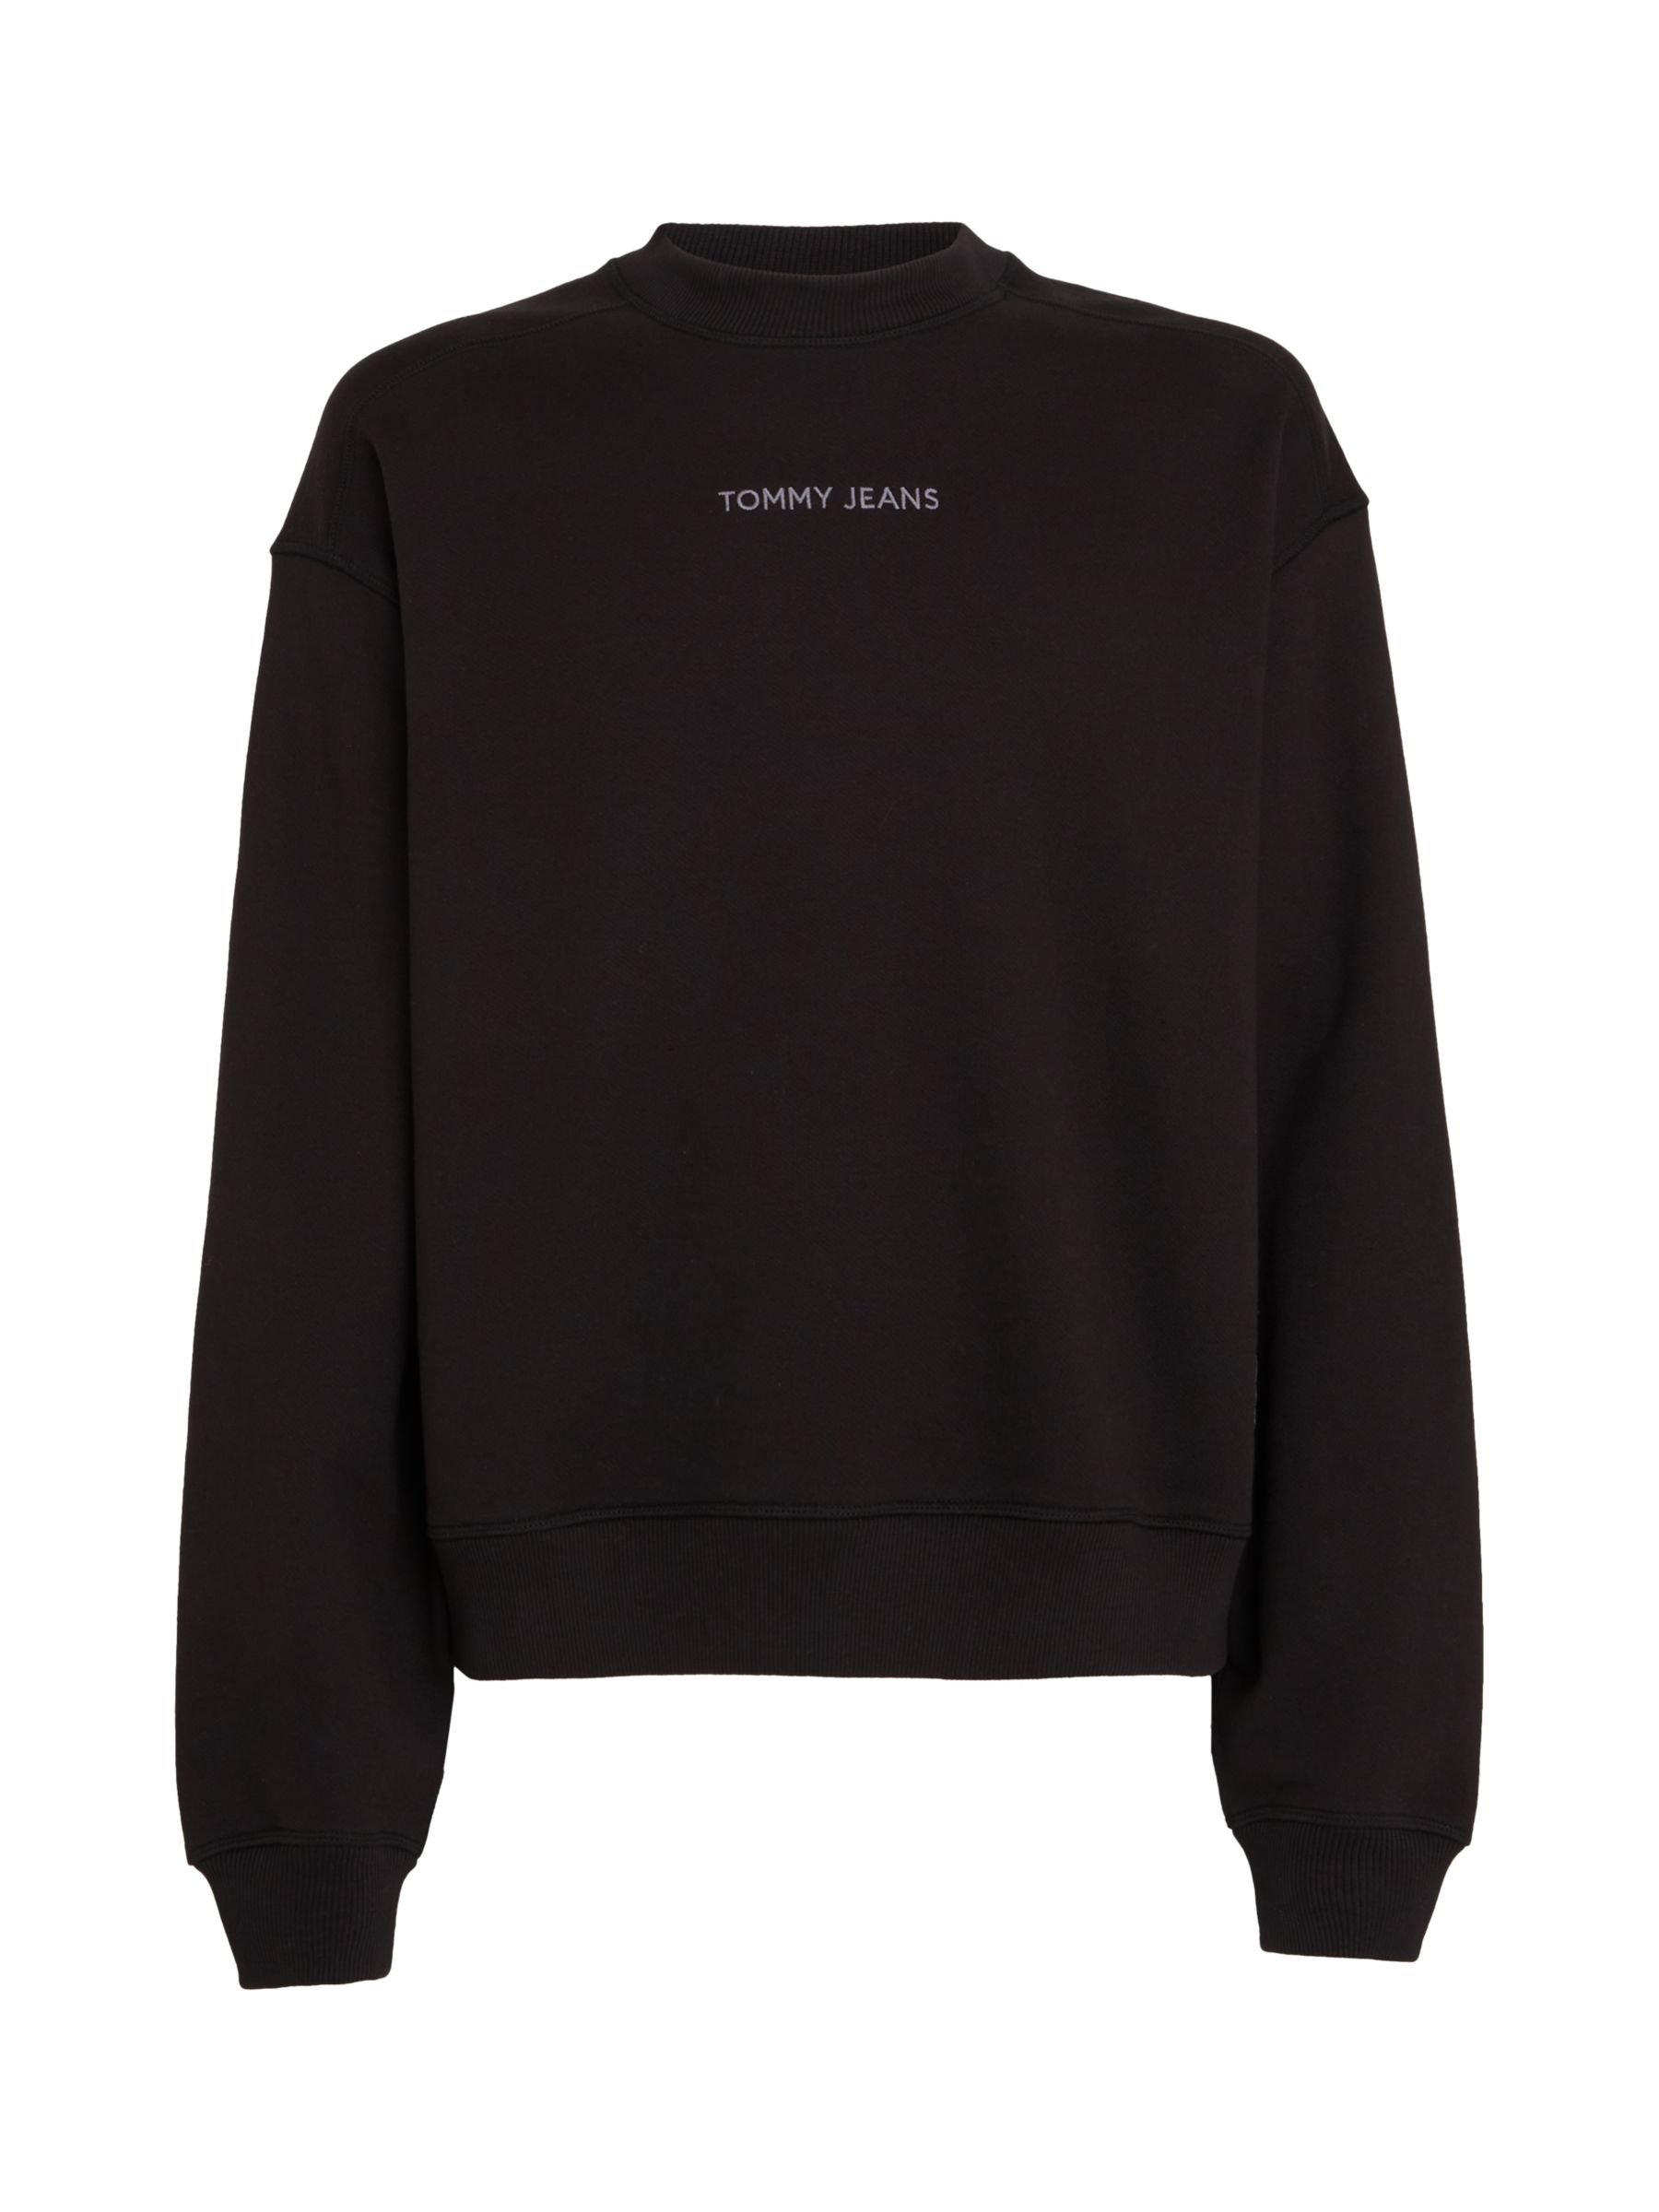 Tommy Jeans Boxy Jumper, Black at John Lewis & Partners